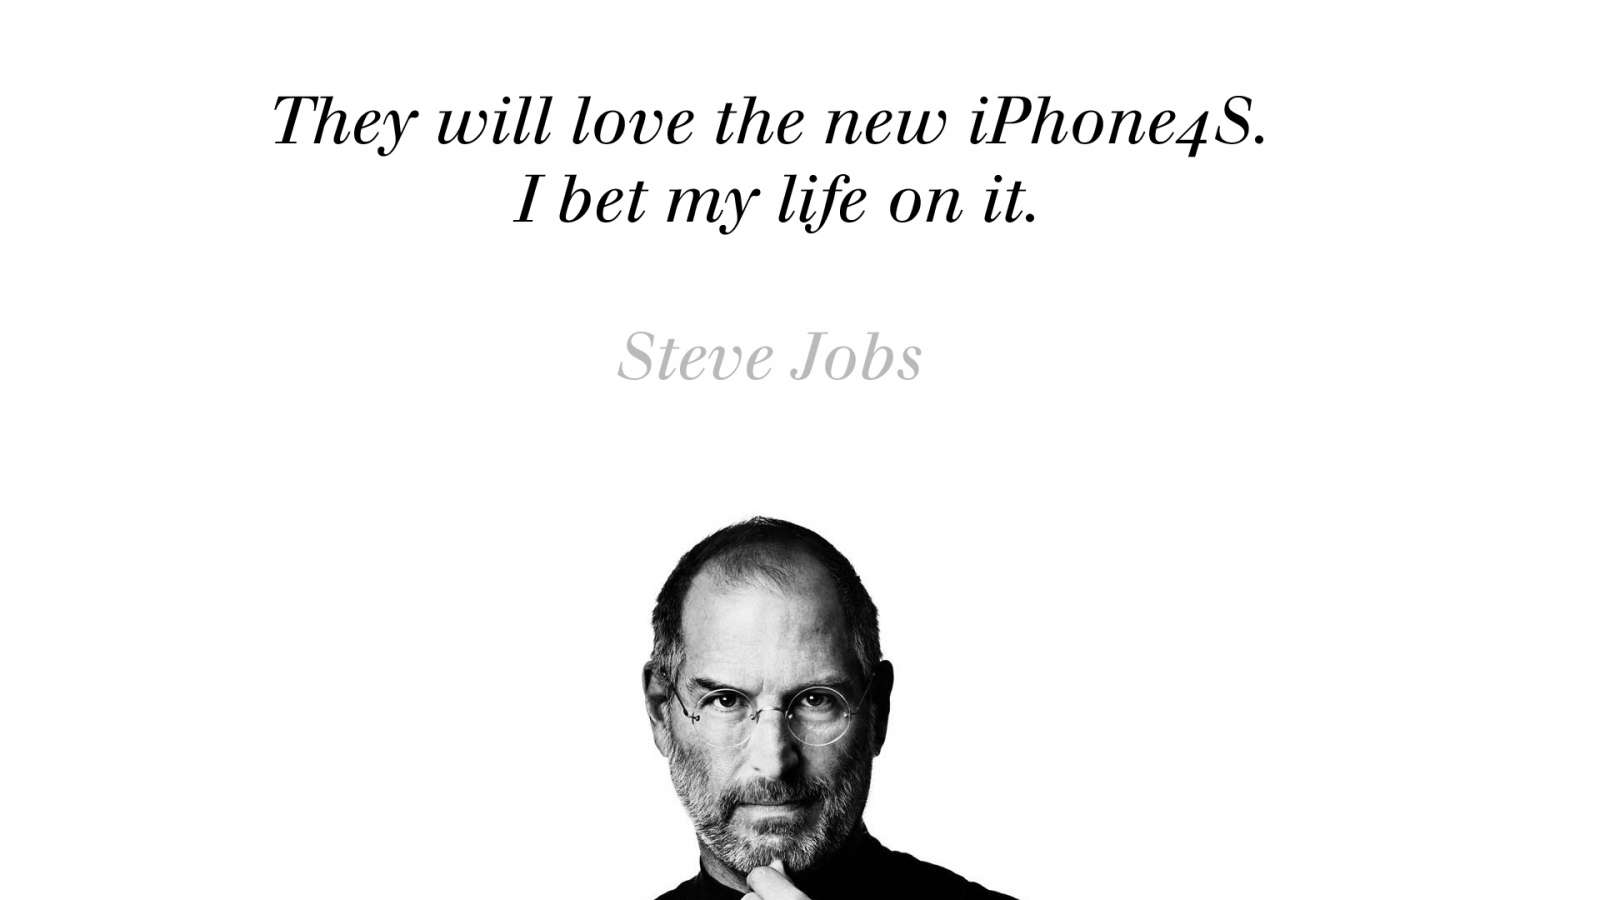 Steve Jobs about iPhone 4S for 1600 x 900 HDTV resolution